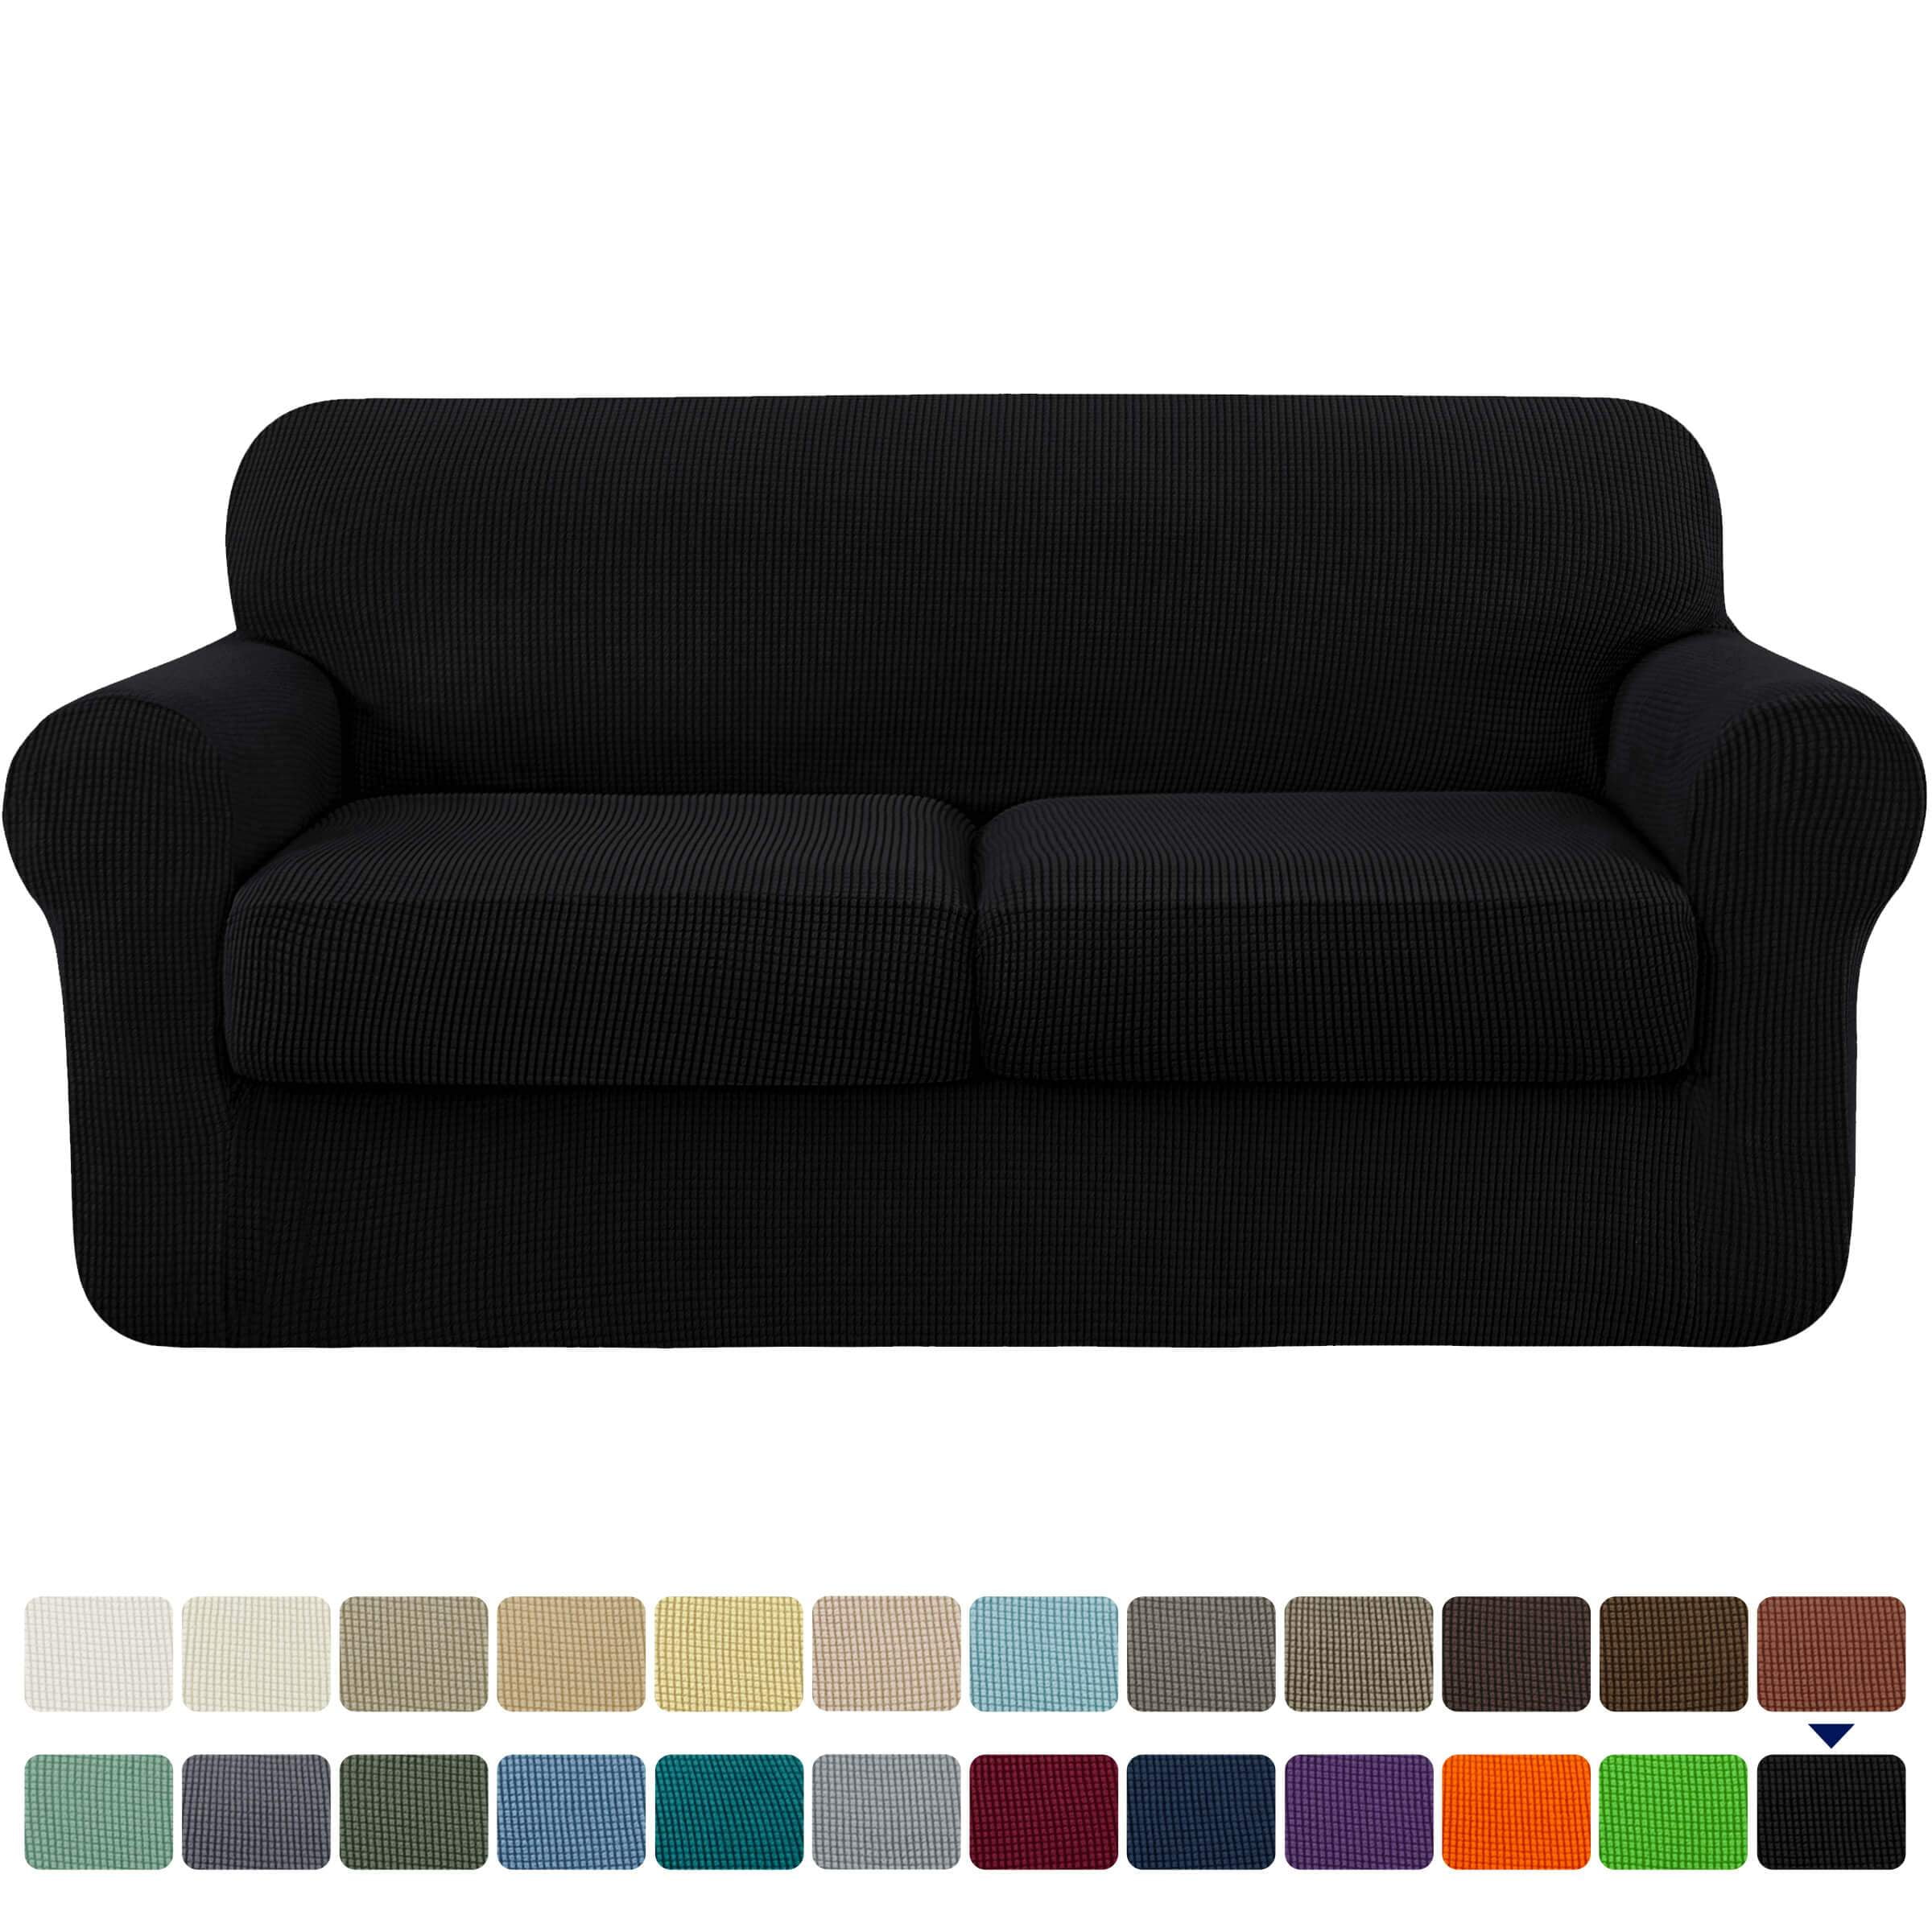 Subrtex Textured Grid Stretch Sofa Cover Couch Slipcover With Separate Cushion Cover Black Loveseat 607145d5 27ed 4dee A79e D82bc9148bc0.440b69ac6e80c19a1ca94d94d4286c80 